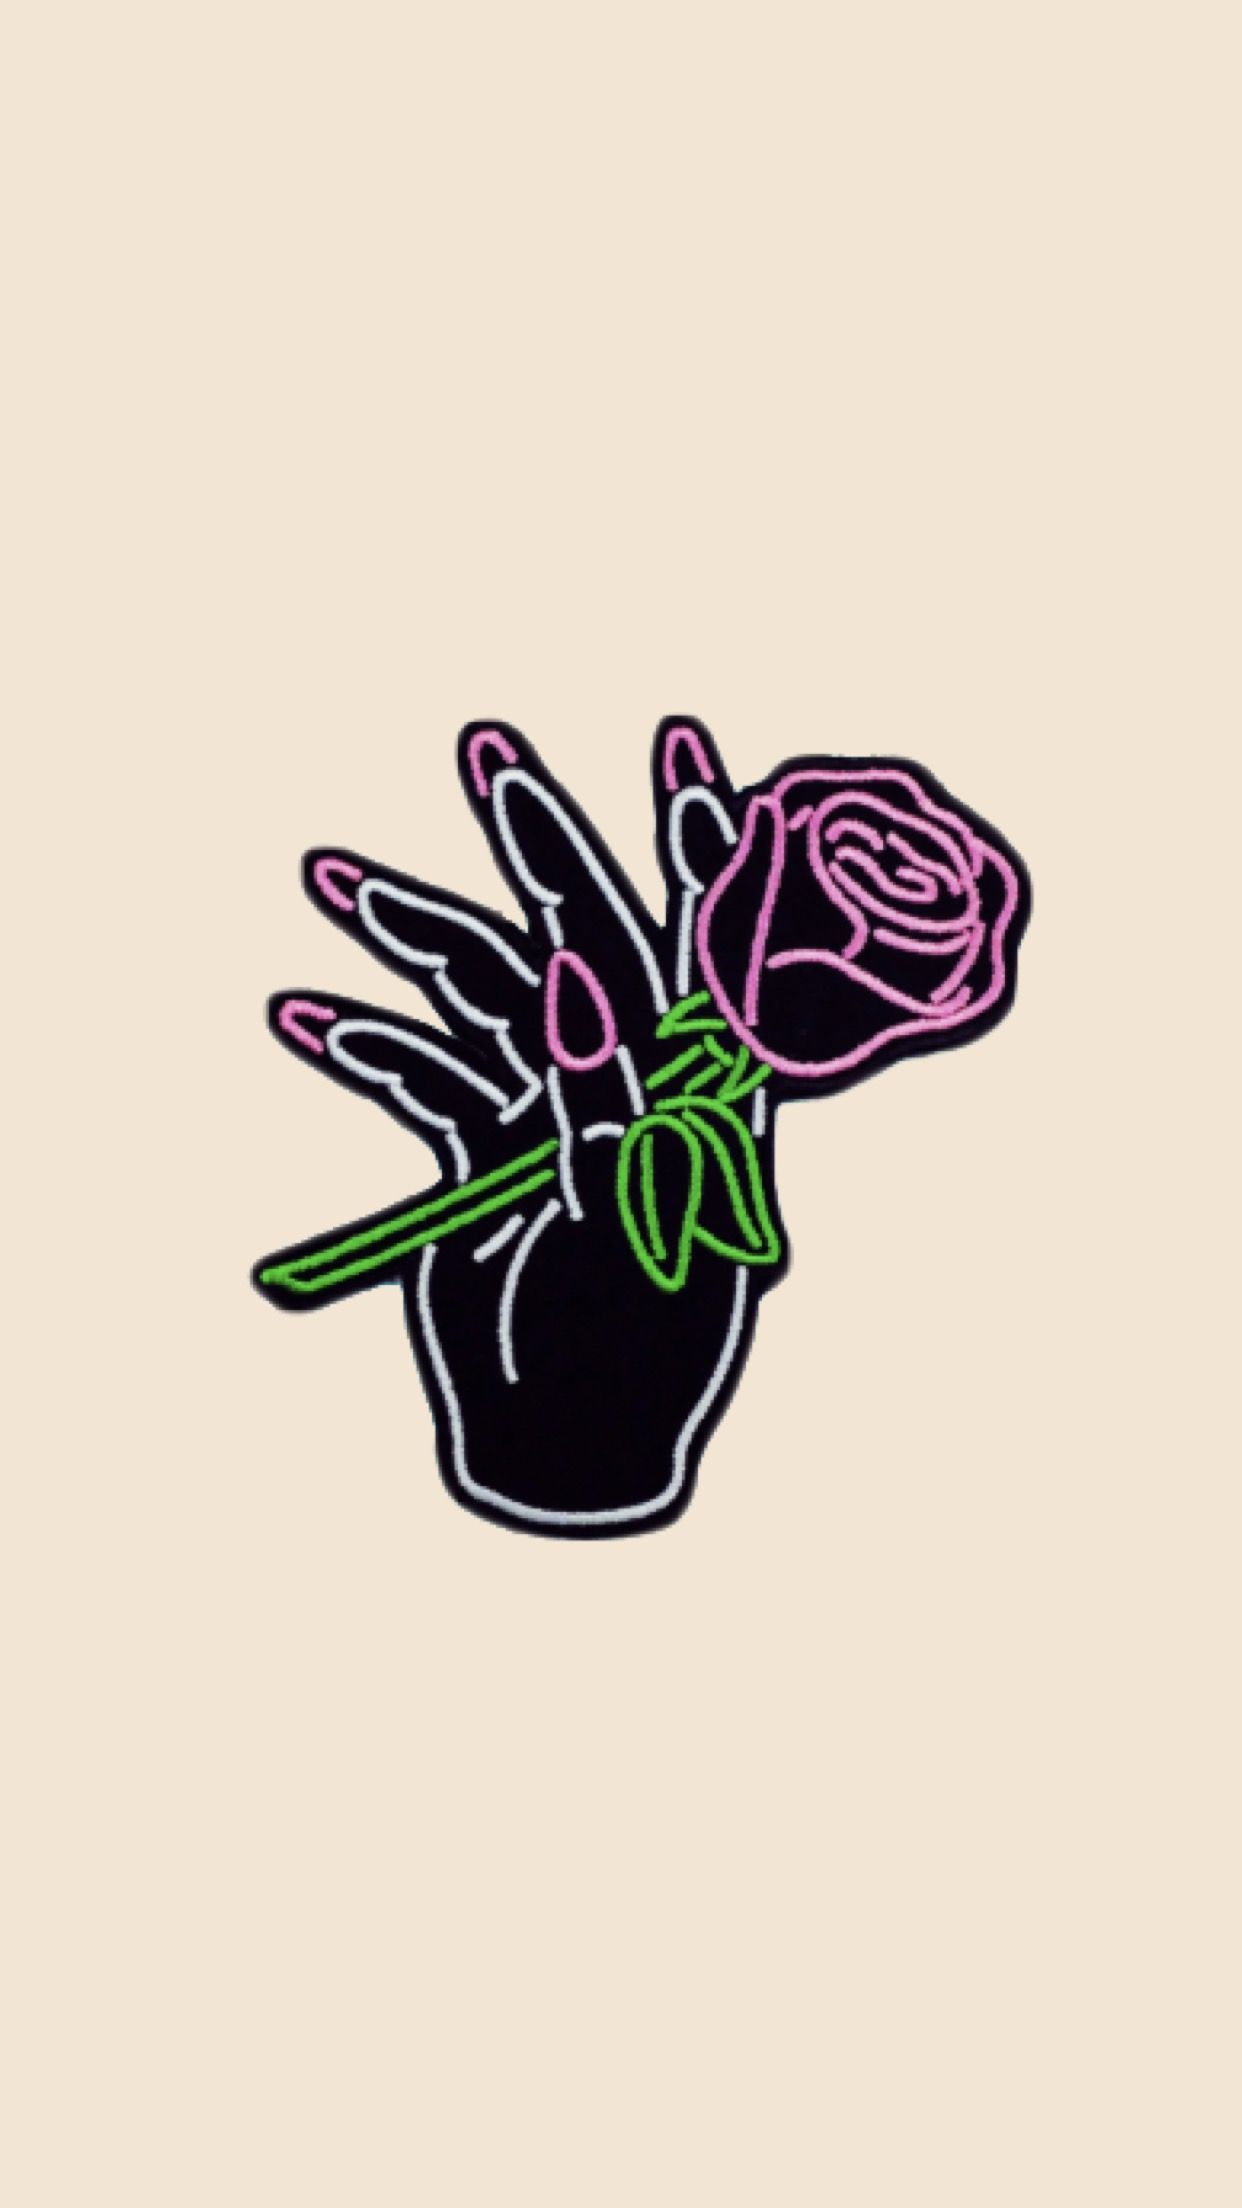 Hand me the flower wallpaper. made by Laurette. instagram:. Hand sticker, Wallpaper iphone tumblr grunge, Aesthetic stickers